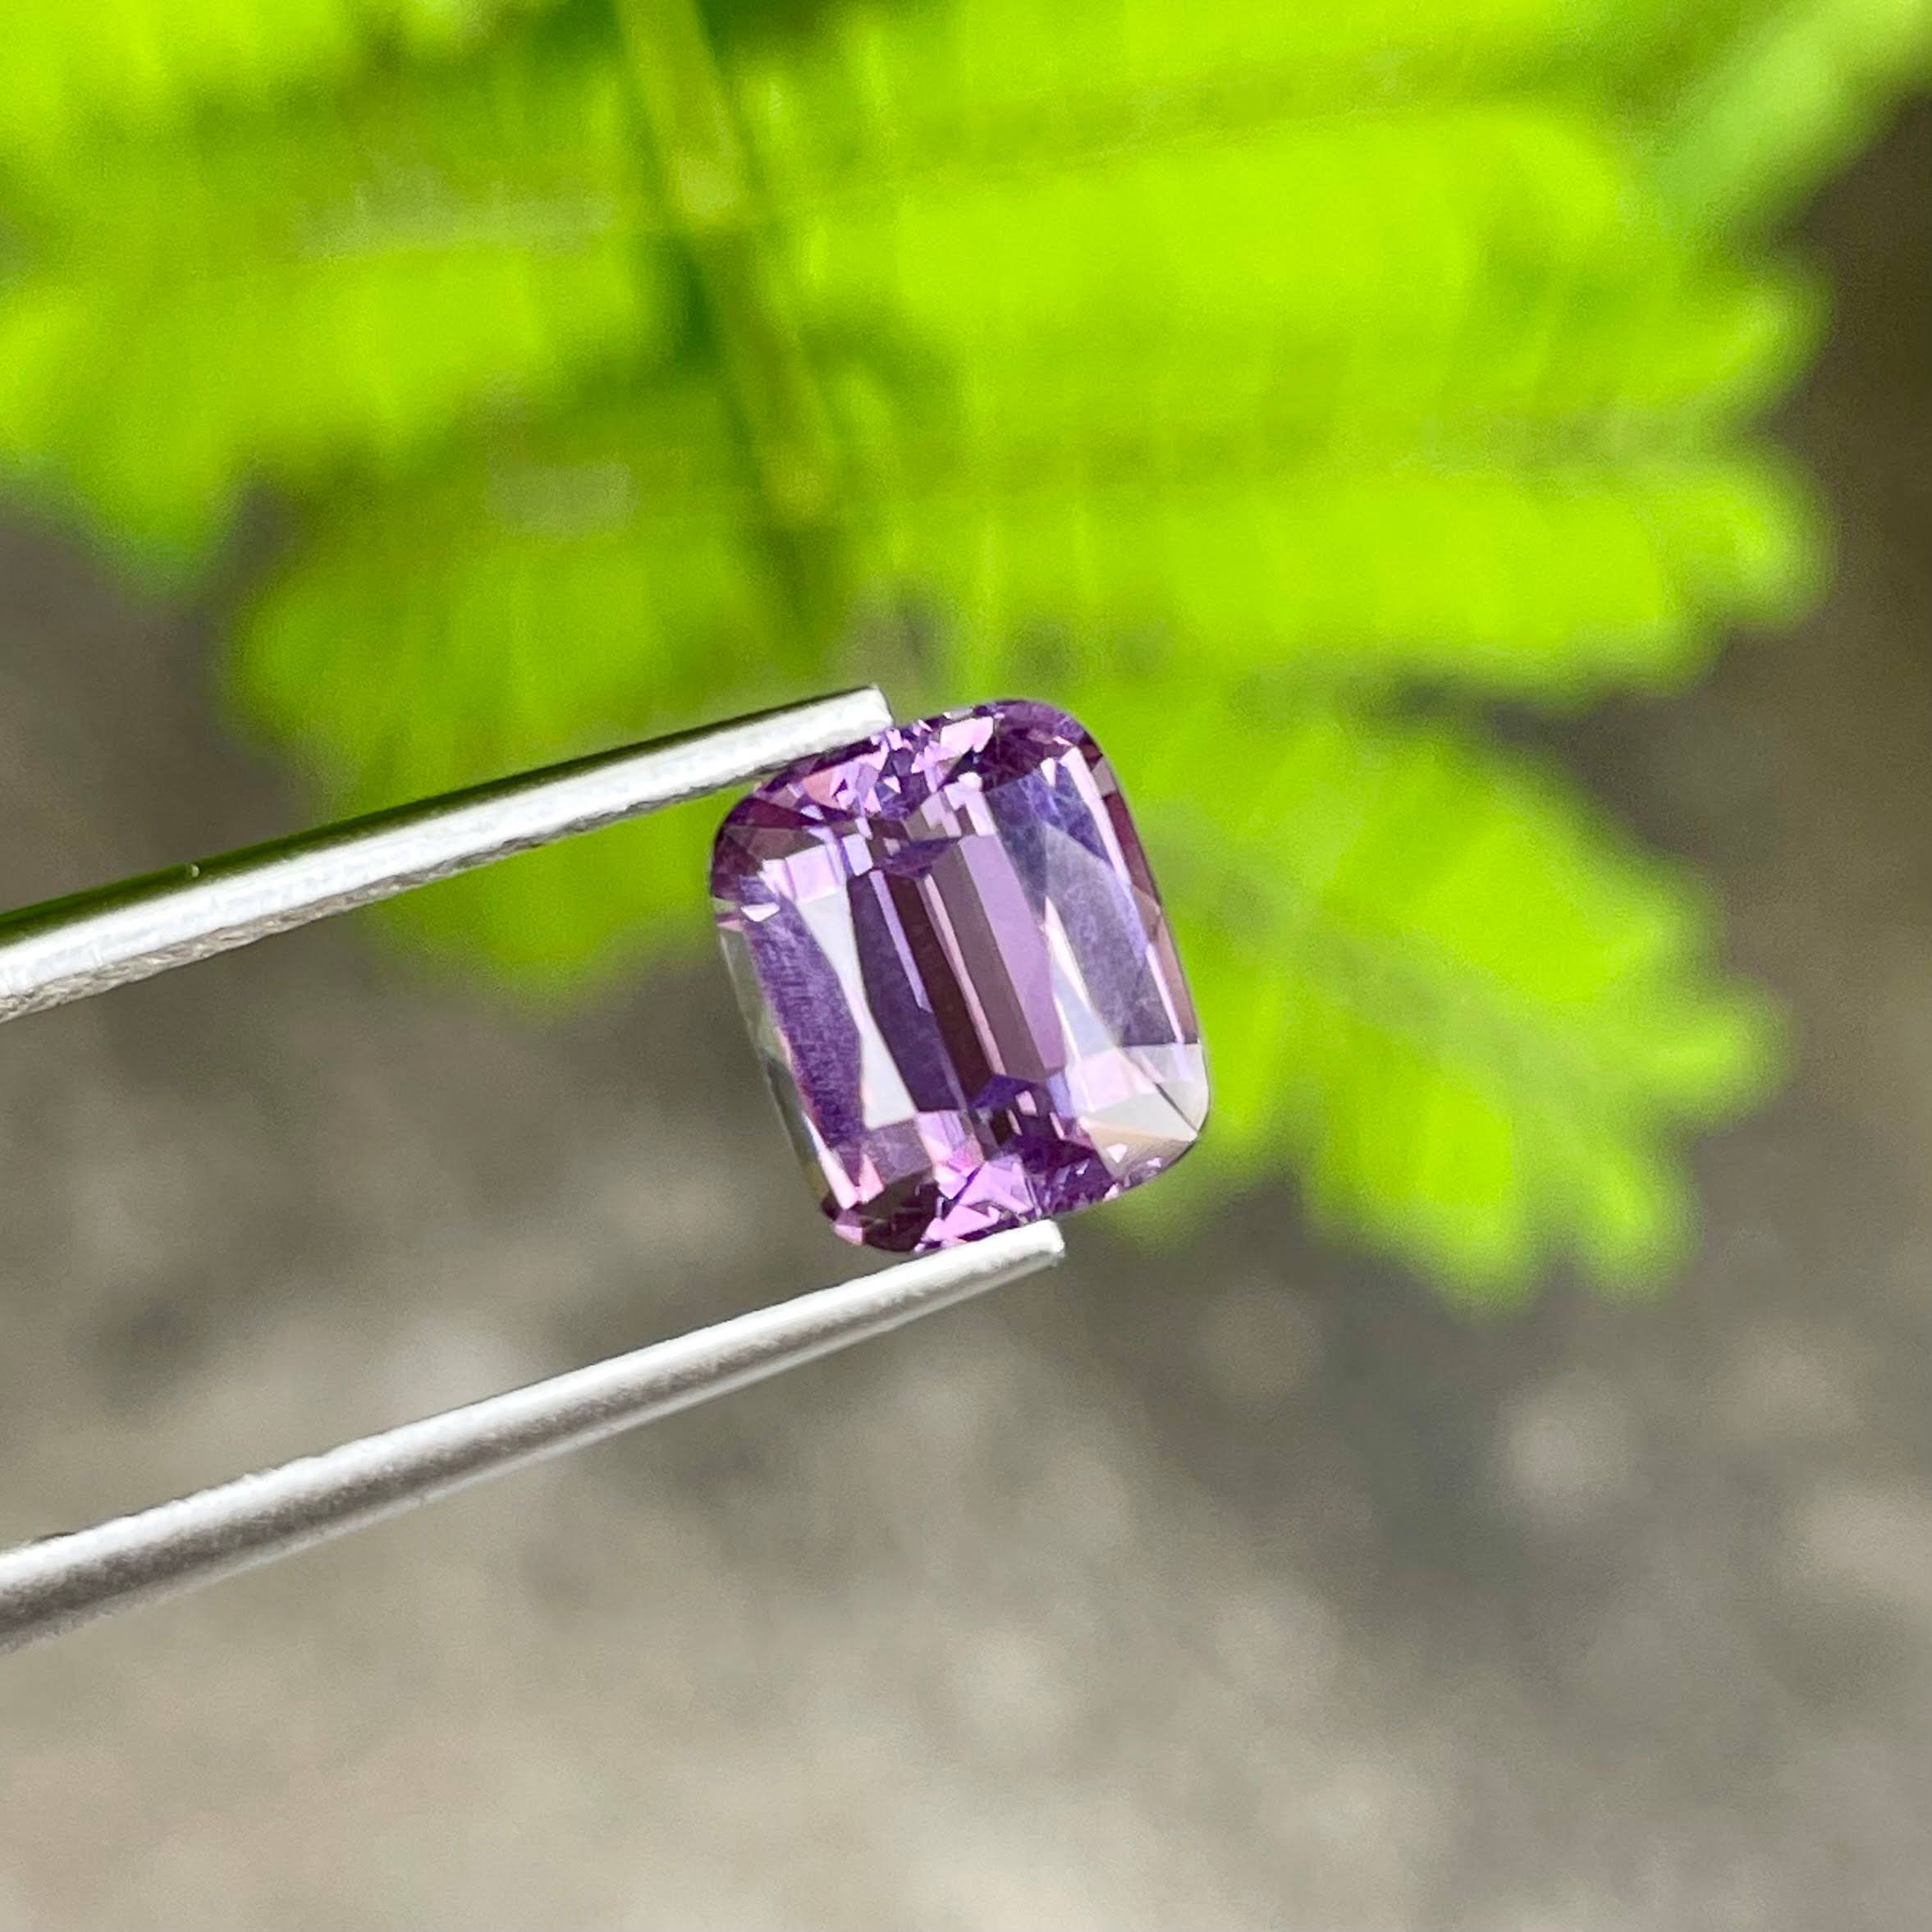 2.70 Carats Lavender Spinel Stone